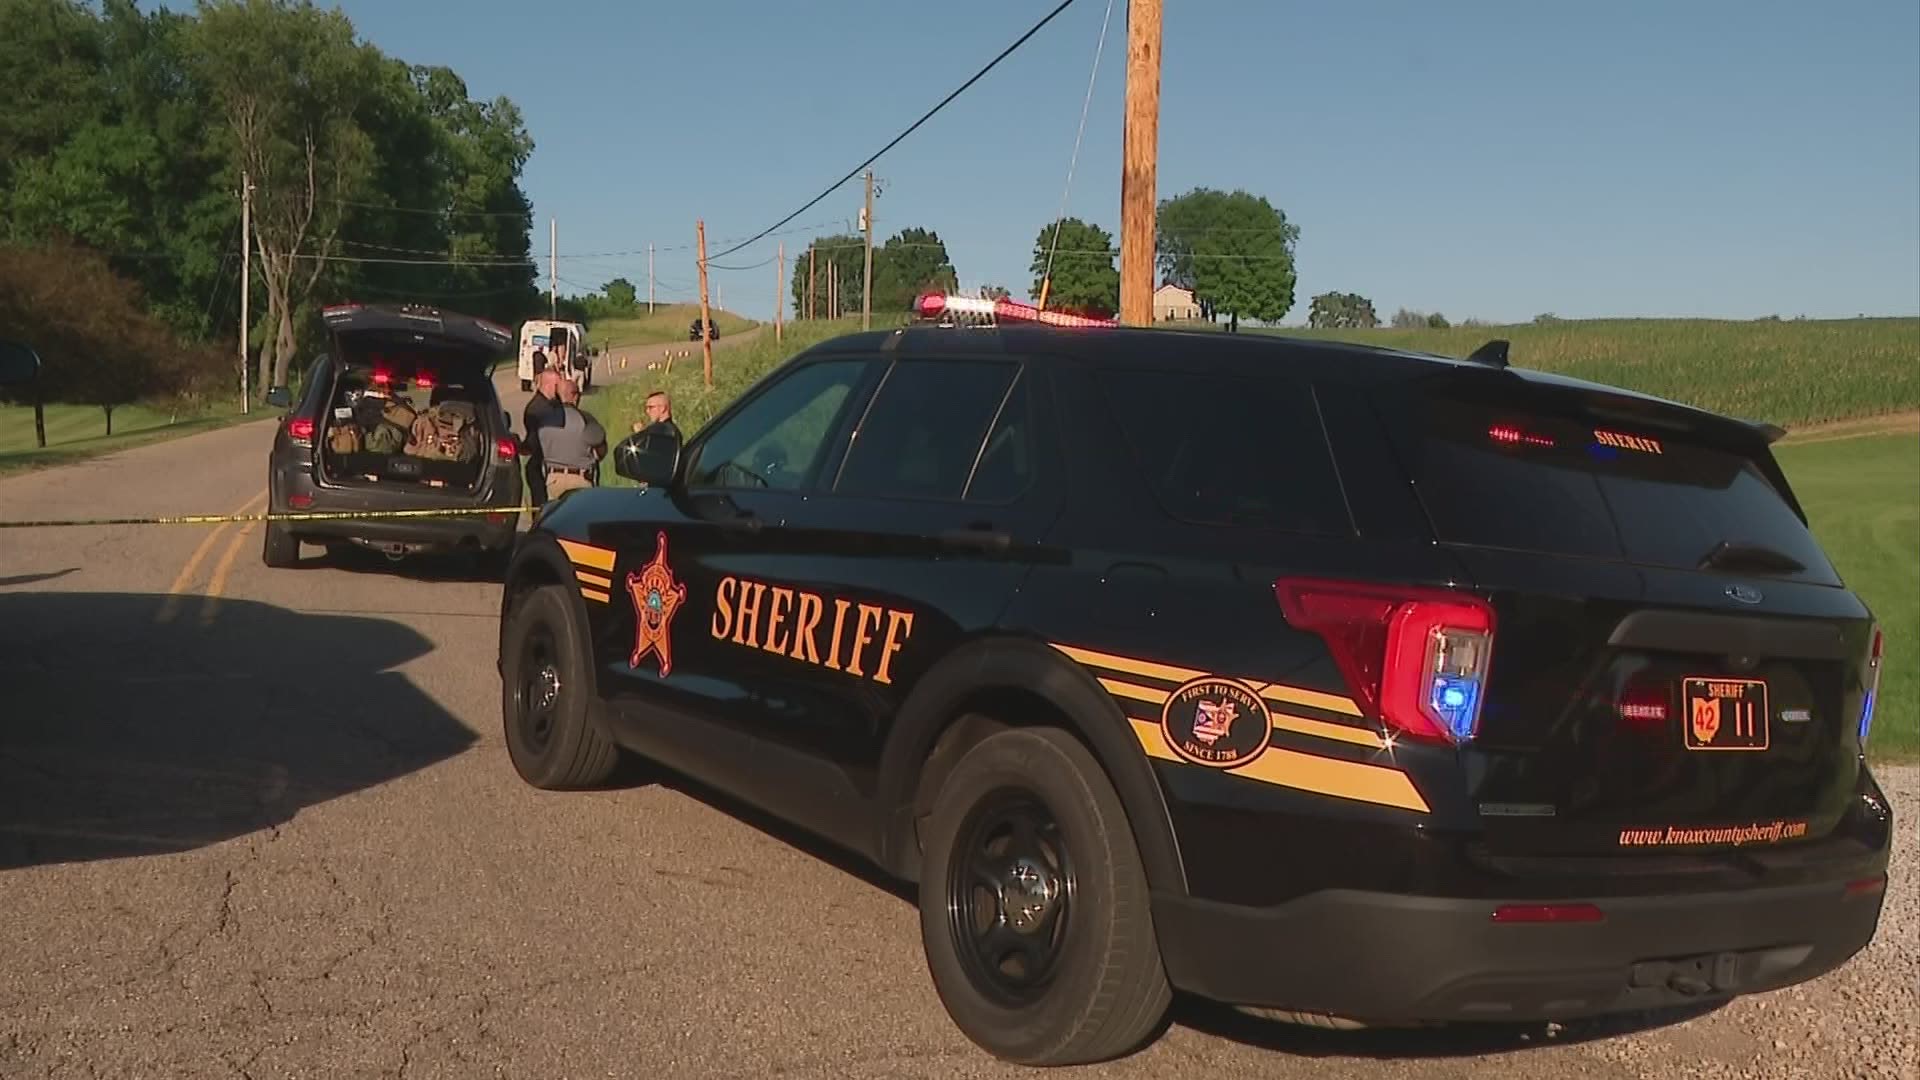 The incident began when a Fredericktown police officer pulled a person over on Fredericktown Amity Road.